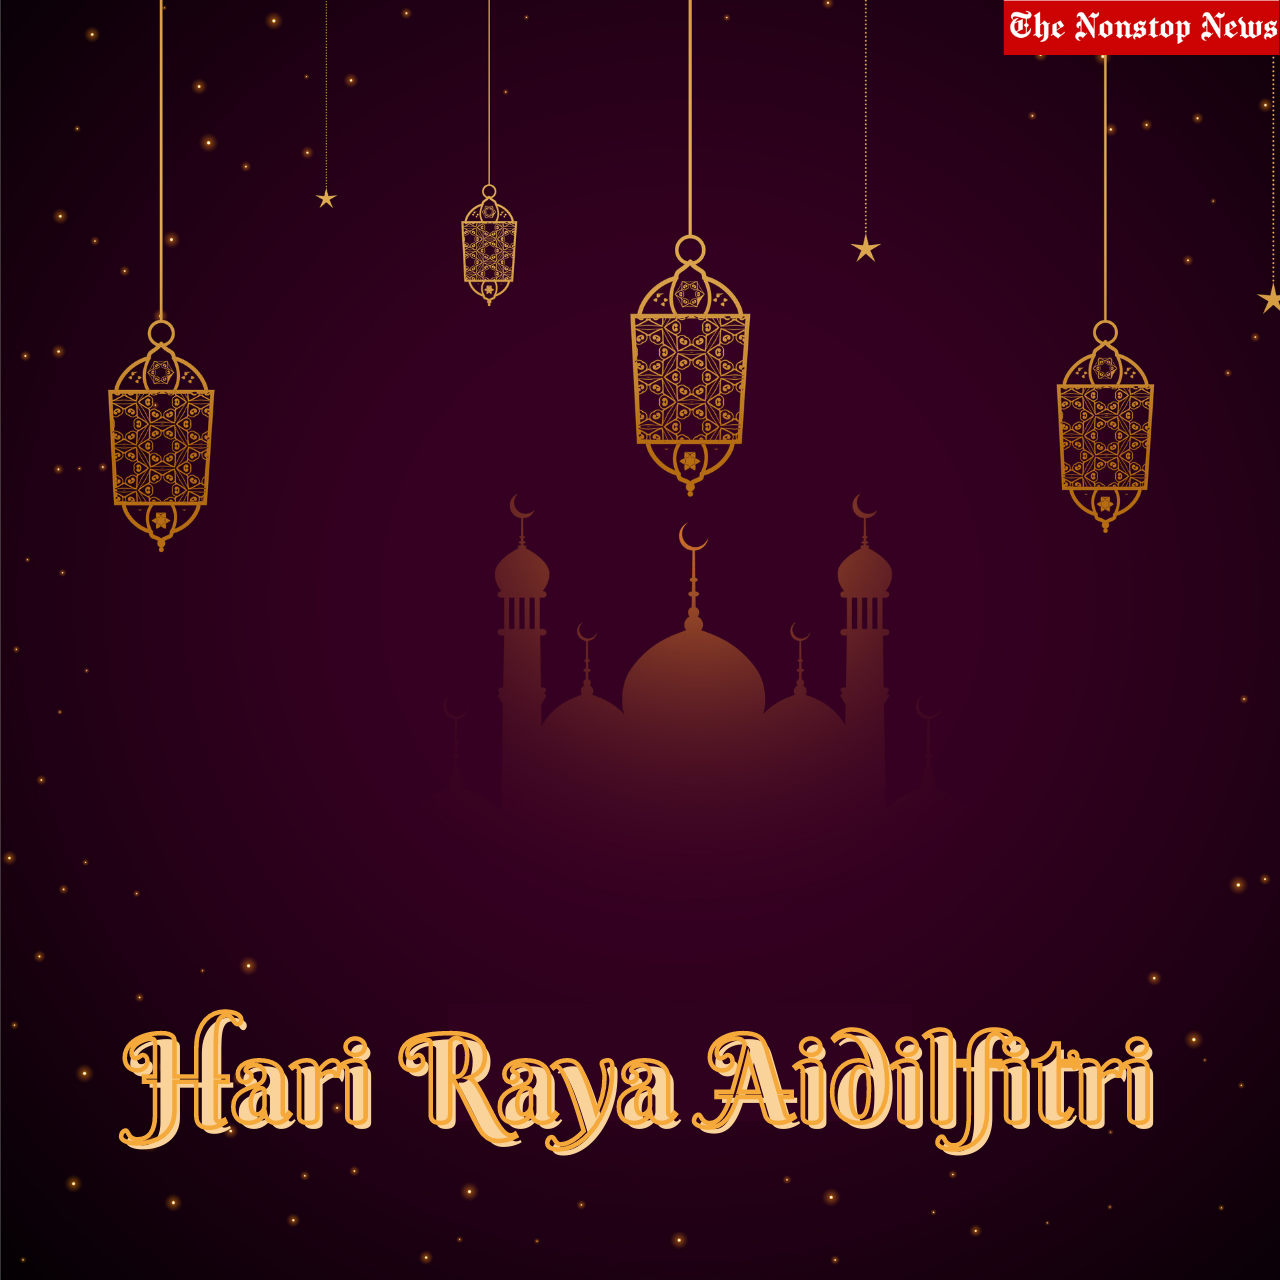 Hari Raya Aidilfitri 2023 Malay Quotes, Greetings, Images, Wishes, Sayings, Stickers, Banners, Posters, Captions and Cliparts